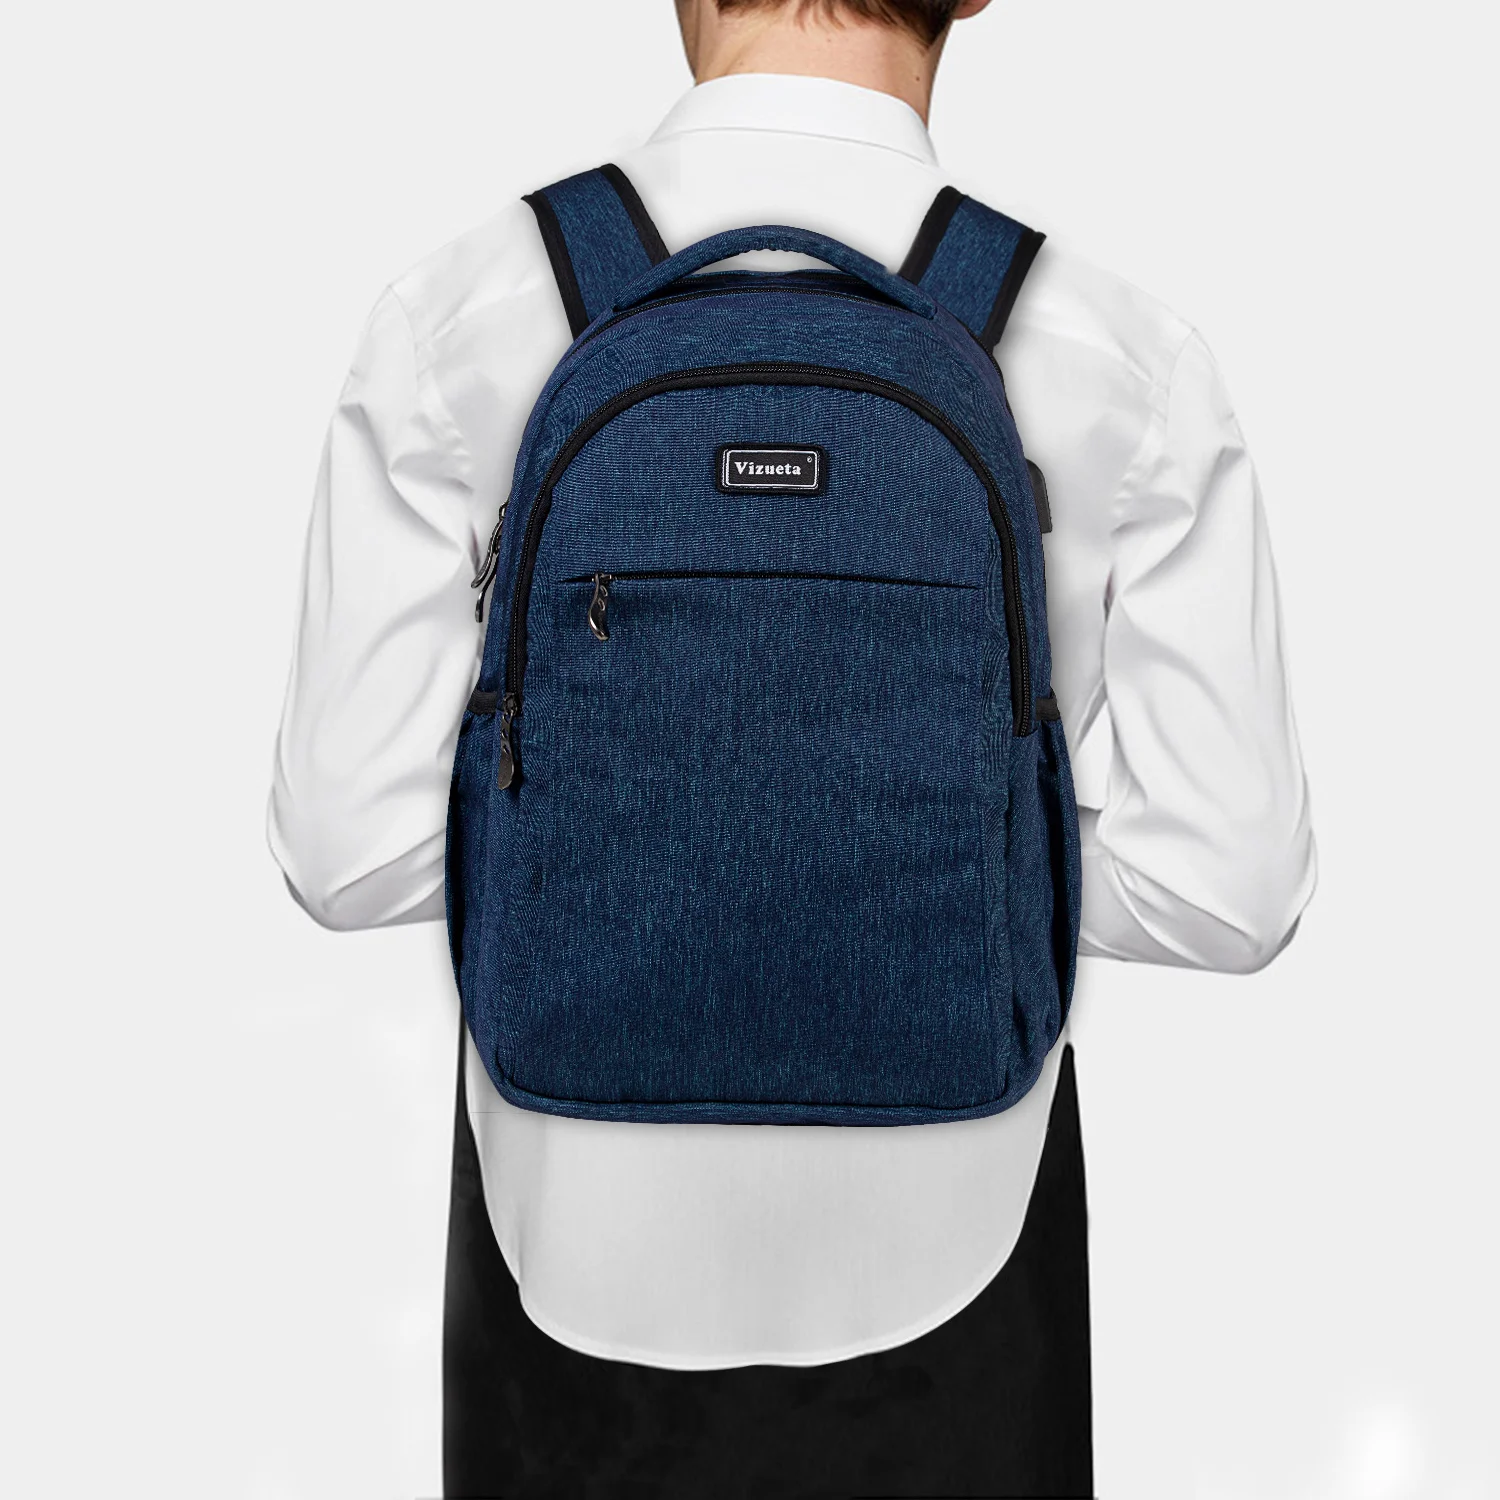 

Customized High Quality Men Waterproof Backbag Pack Business Laptop Sac A Dos Bagpack Polyester Bags For Men Backpack Laptop Bag, Accept customized logo